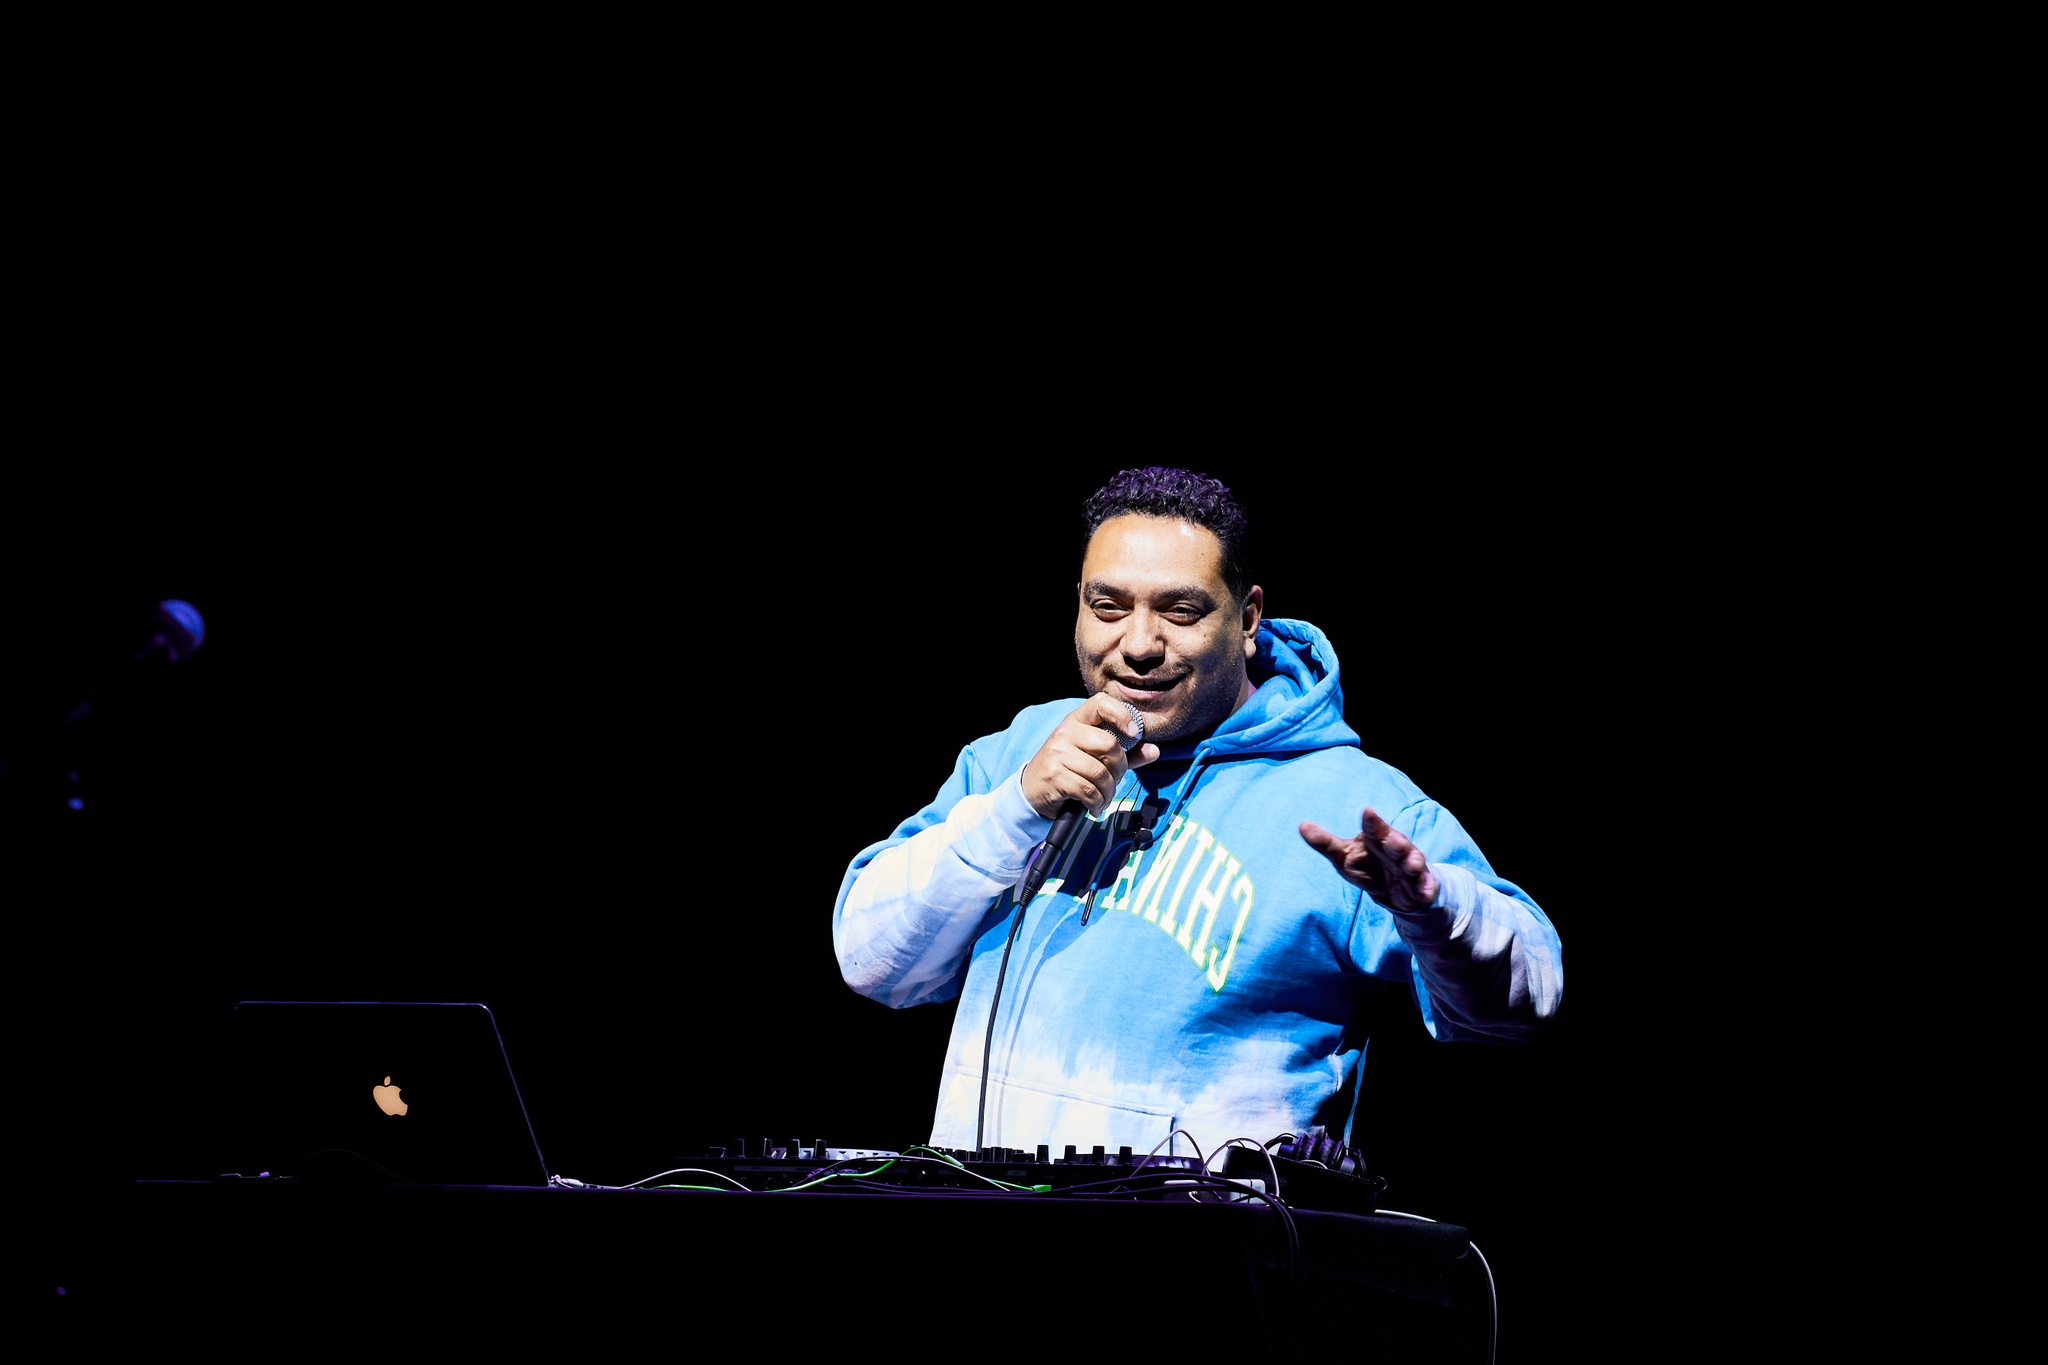 A DJ in a blue and white hoodie speaking into a microphone in front of his turntables